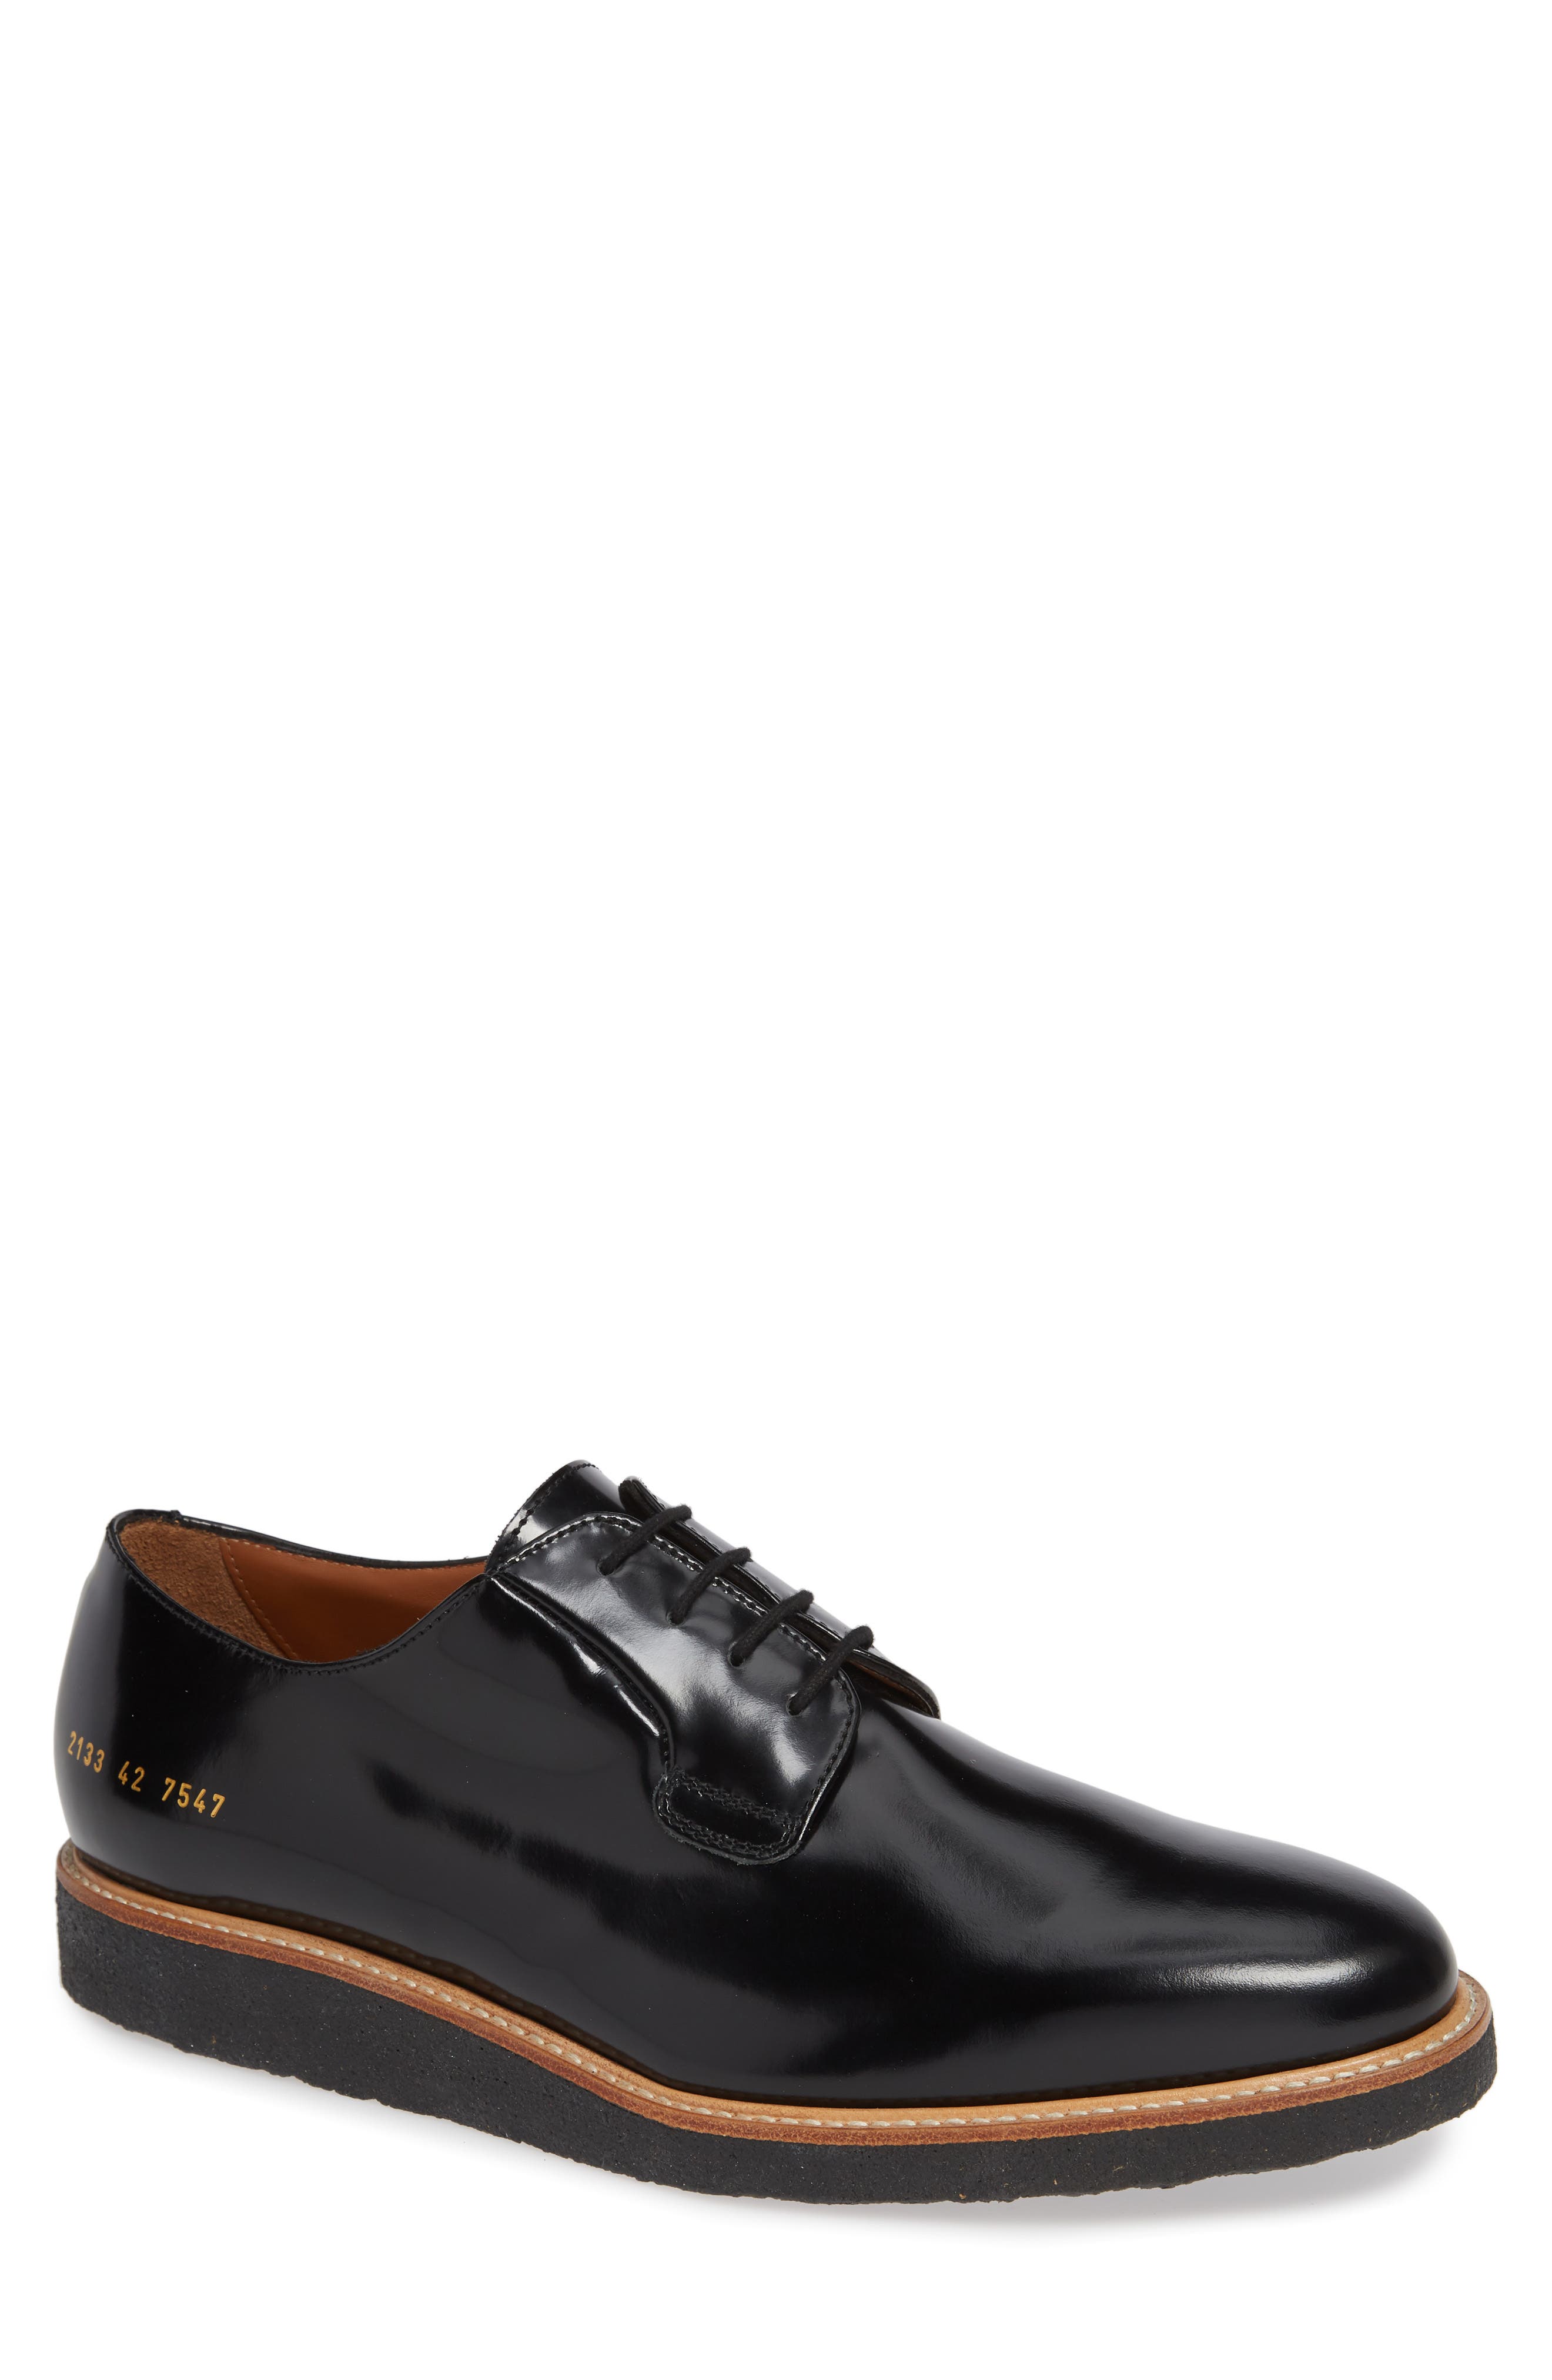 Common Projects Plain Toe Derby in Black Shine at Nordstrom, Size 7Us